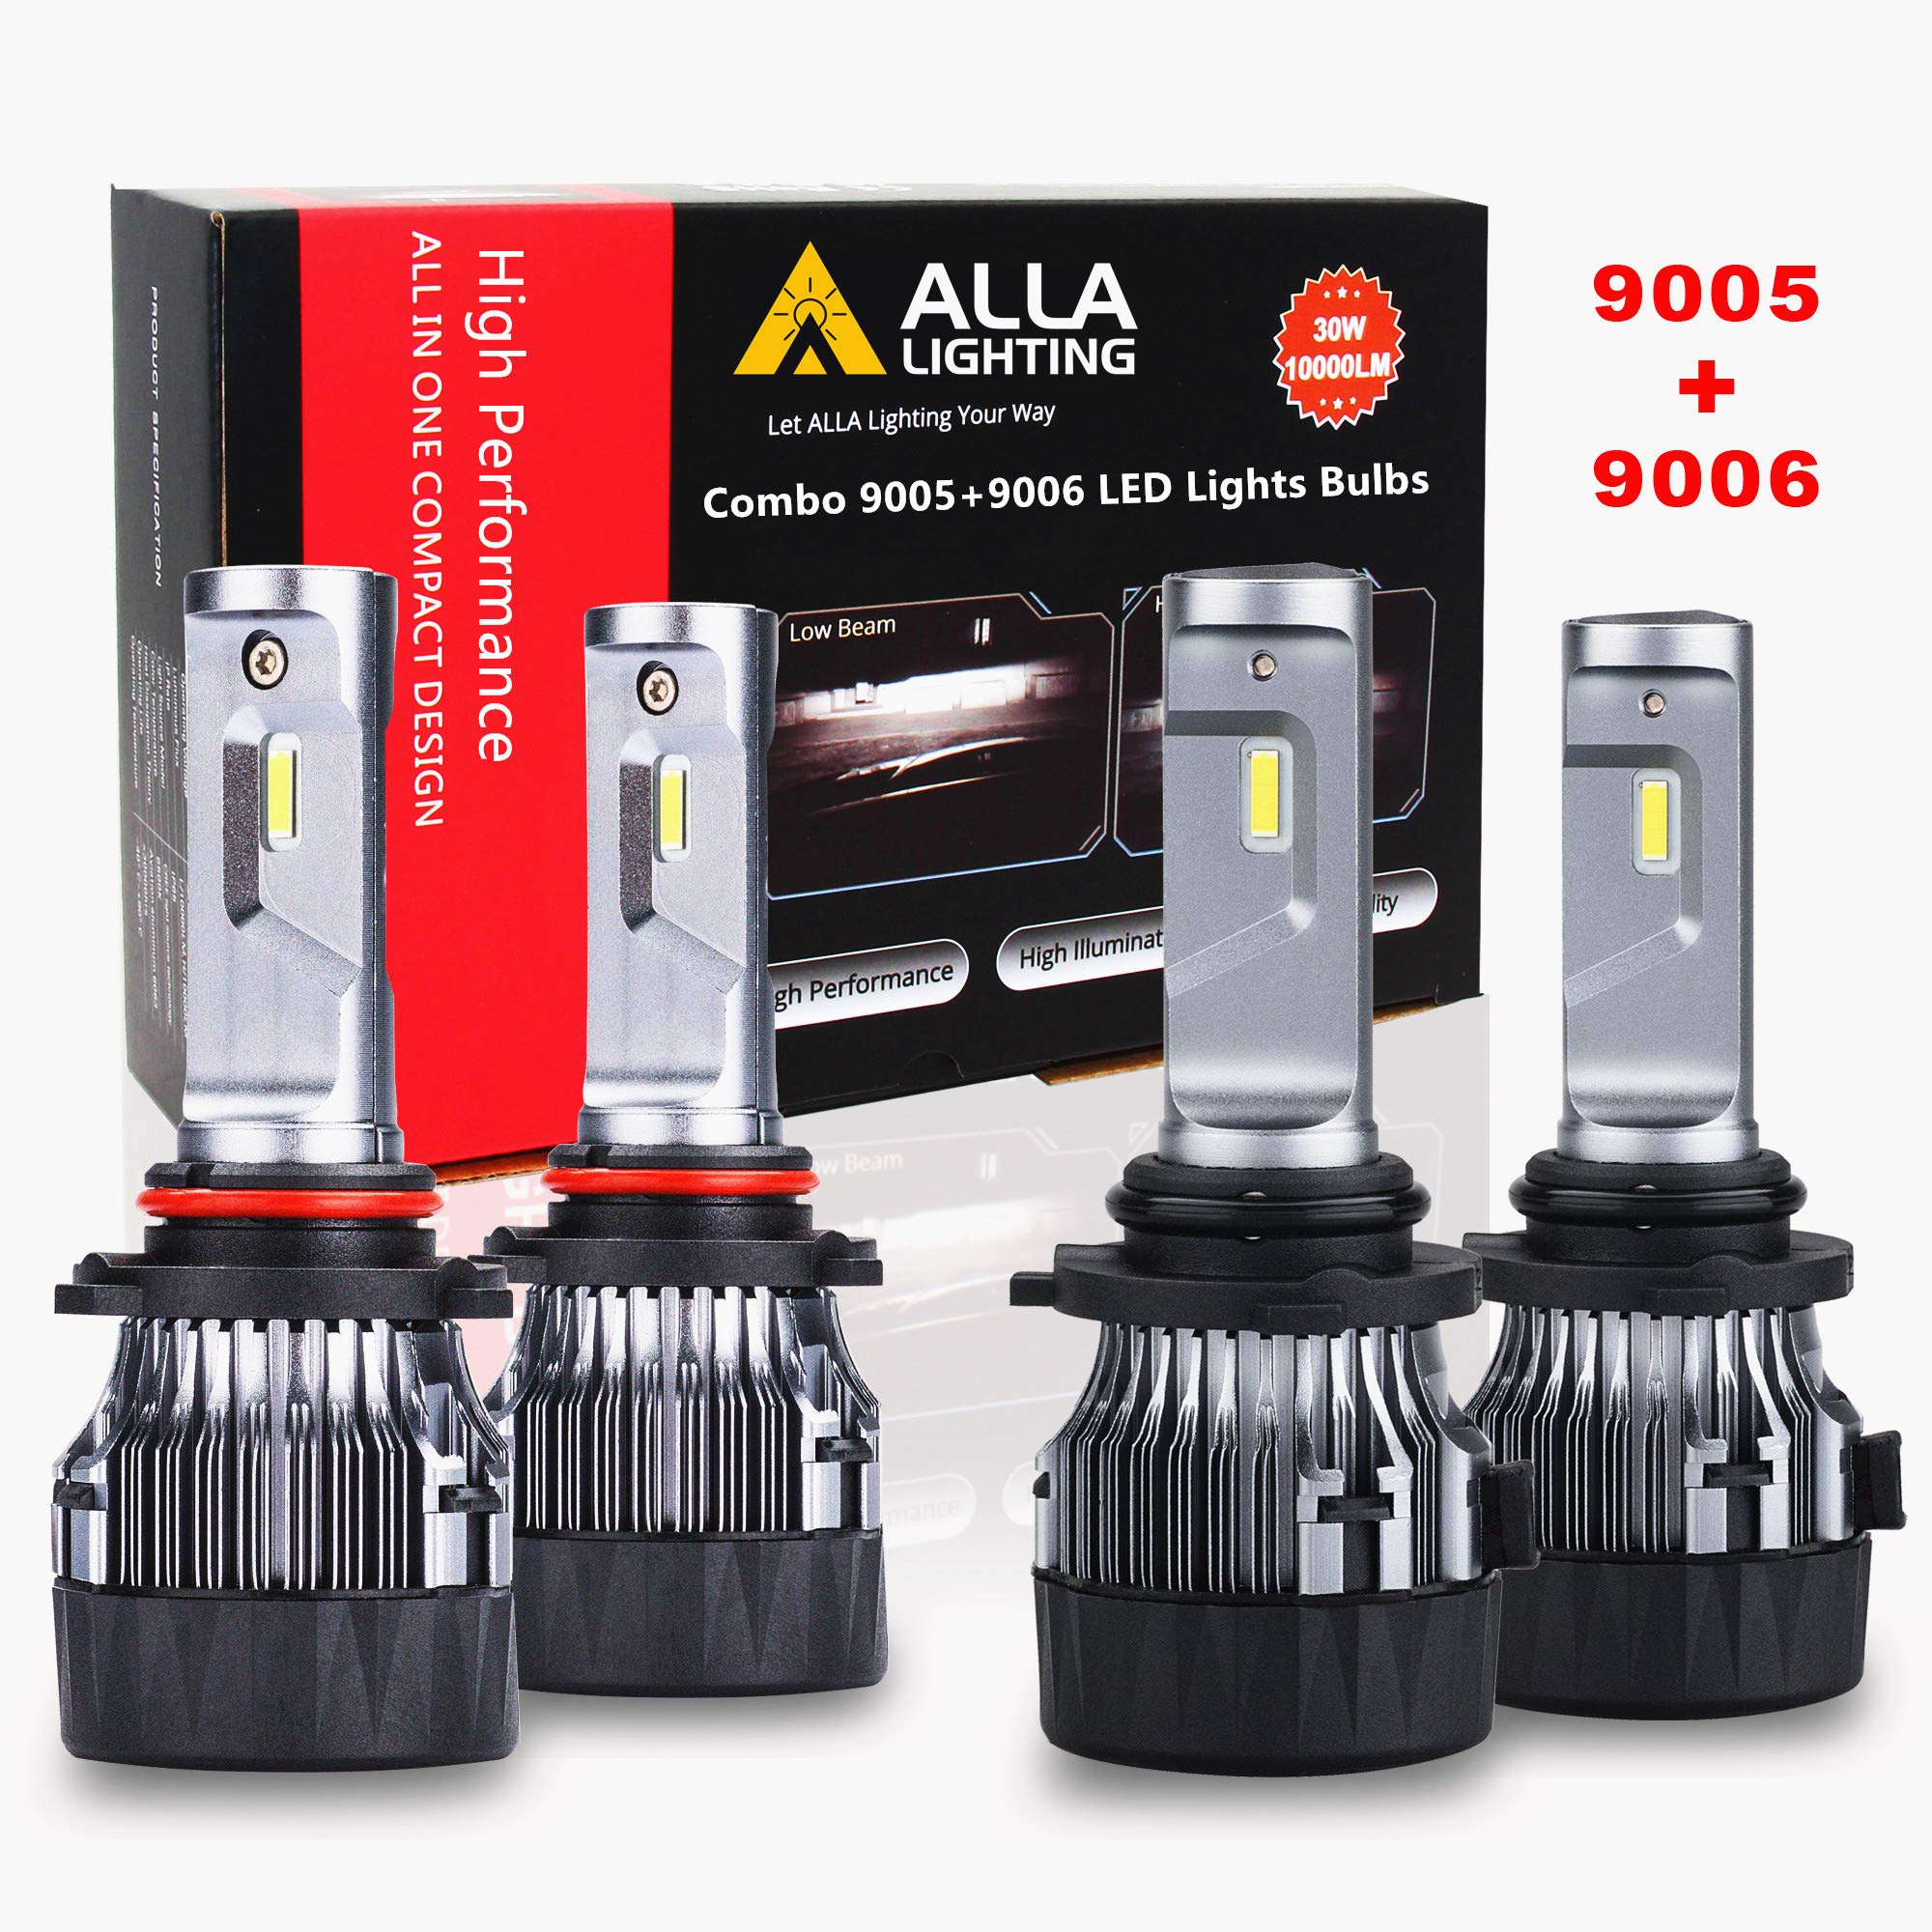 ALLA Lighting S-HCR 9005 9006 LED Bulbs Combo 10000Lms Xtremely Super Bright HB3 HB4 Replacement, 6000K ~ 6500K Xenon White (4 Packs, 2 Sets)